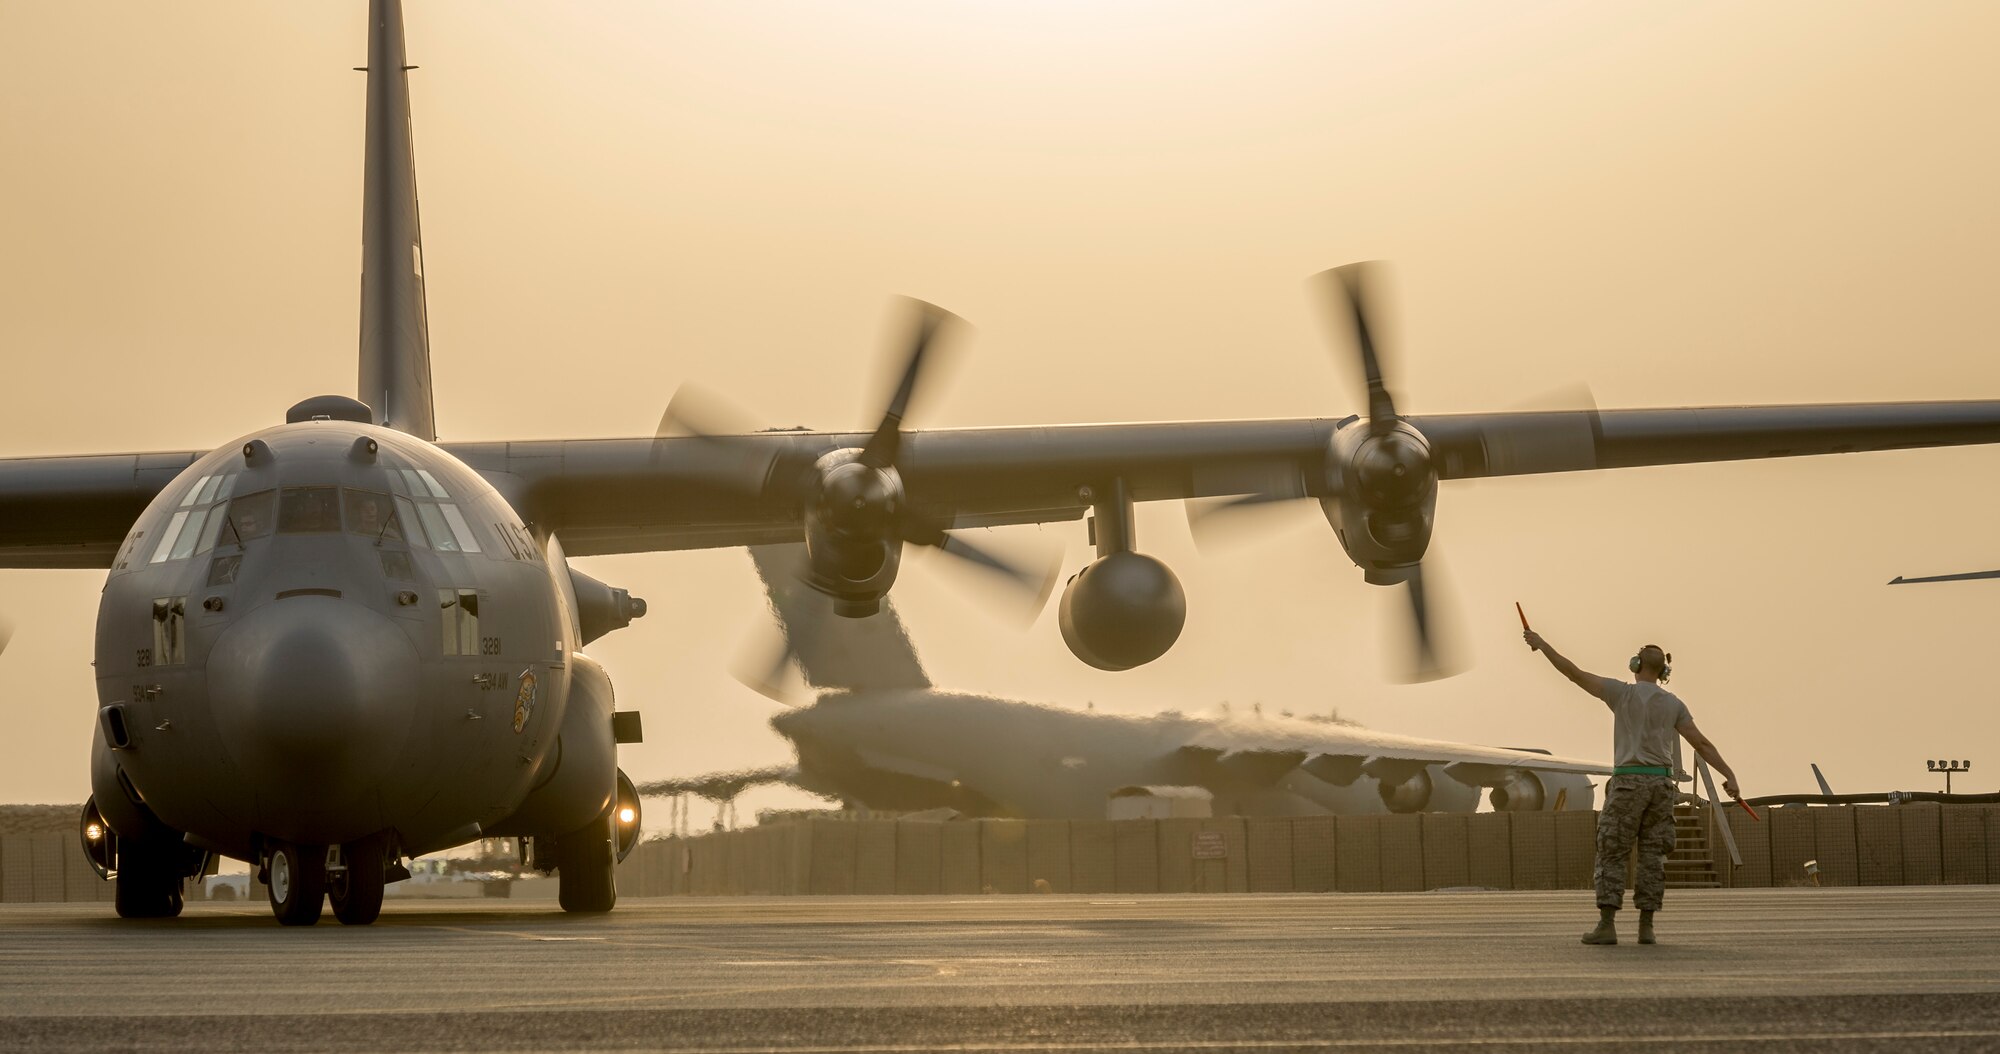 U.S. Air Force Senior Master Sgt. Kyle Klass, 386th Expeditionary Aircraft Maintenance Squadron, dayshift production superintendent, marshals a C-130H Hercules from the 934th Air Wing after it landed at its new home Sept. 12, 2014 at an undisclosed location in Southwest Asia. The crew will be stationed with the 386th Air Expeditionary Wing for the next four months and deployed from Minneapolis-St Paul Air Reserve Station, Minn. in support of Operation Enduring Freedom. (U.S. Air Force photo by Staff Sgt. Jeremy Bowcock)